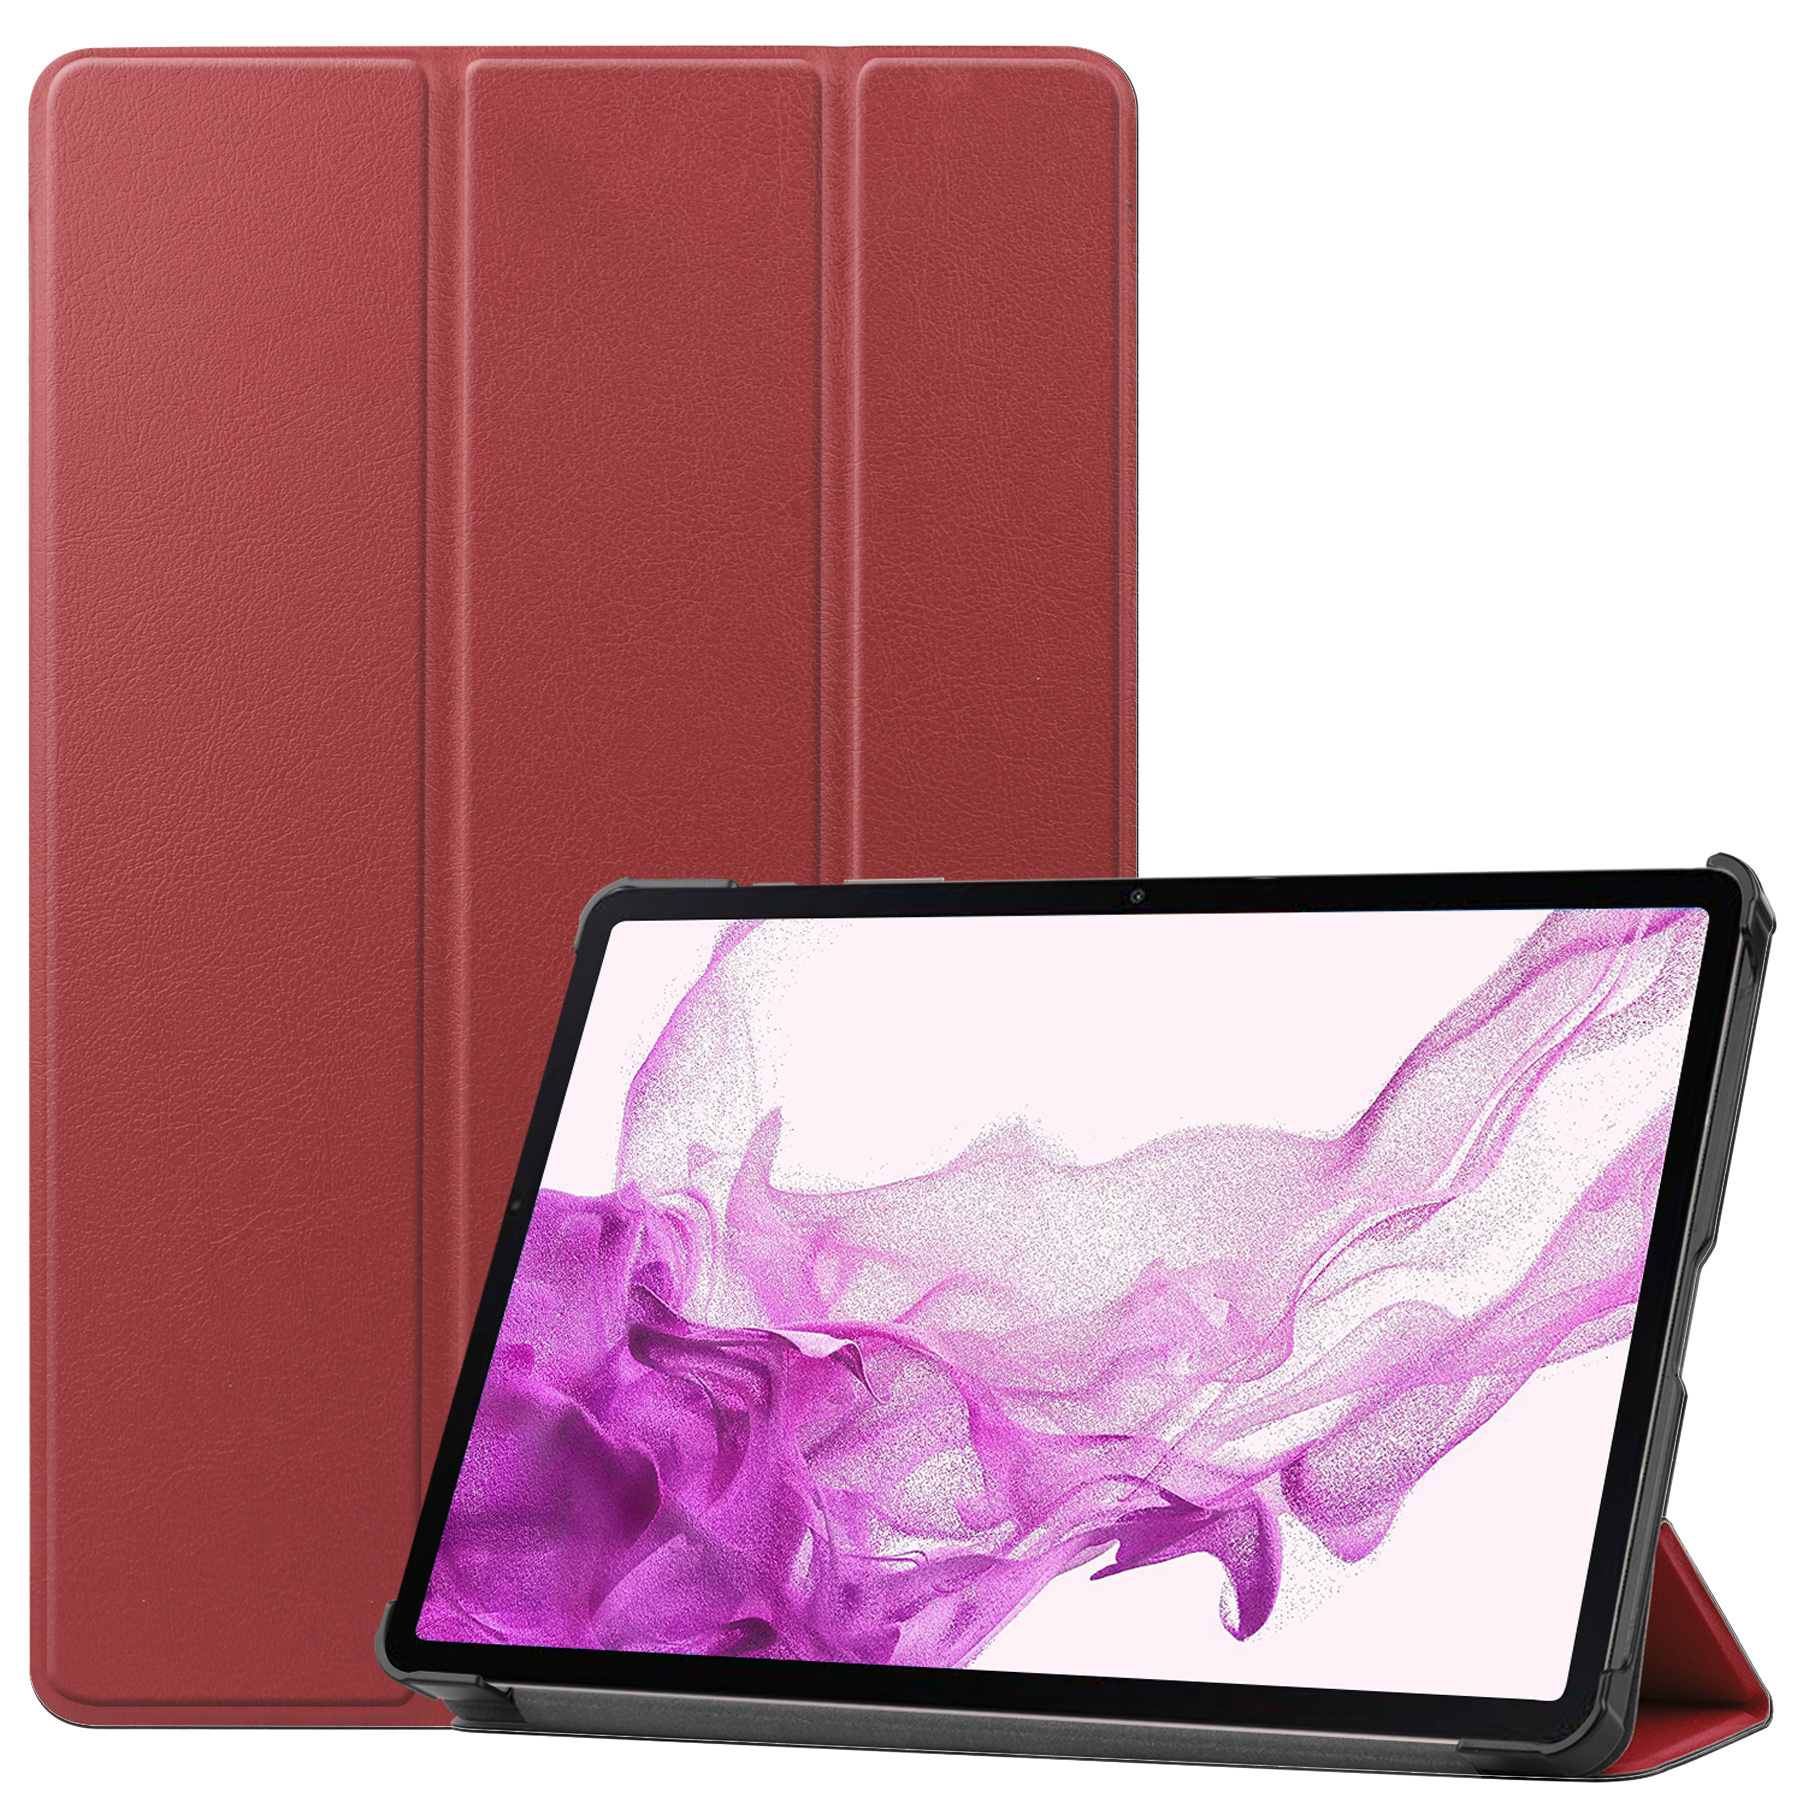 Samsung Galaxy Tab S8 Hoesje 11 inch Case Donker Rood - Samsung Galaxy Tab S8 Hoes Hardcover Hoesje Bookcase Met Uitsparing S Pen - Donker Rood